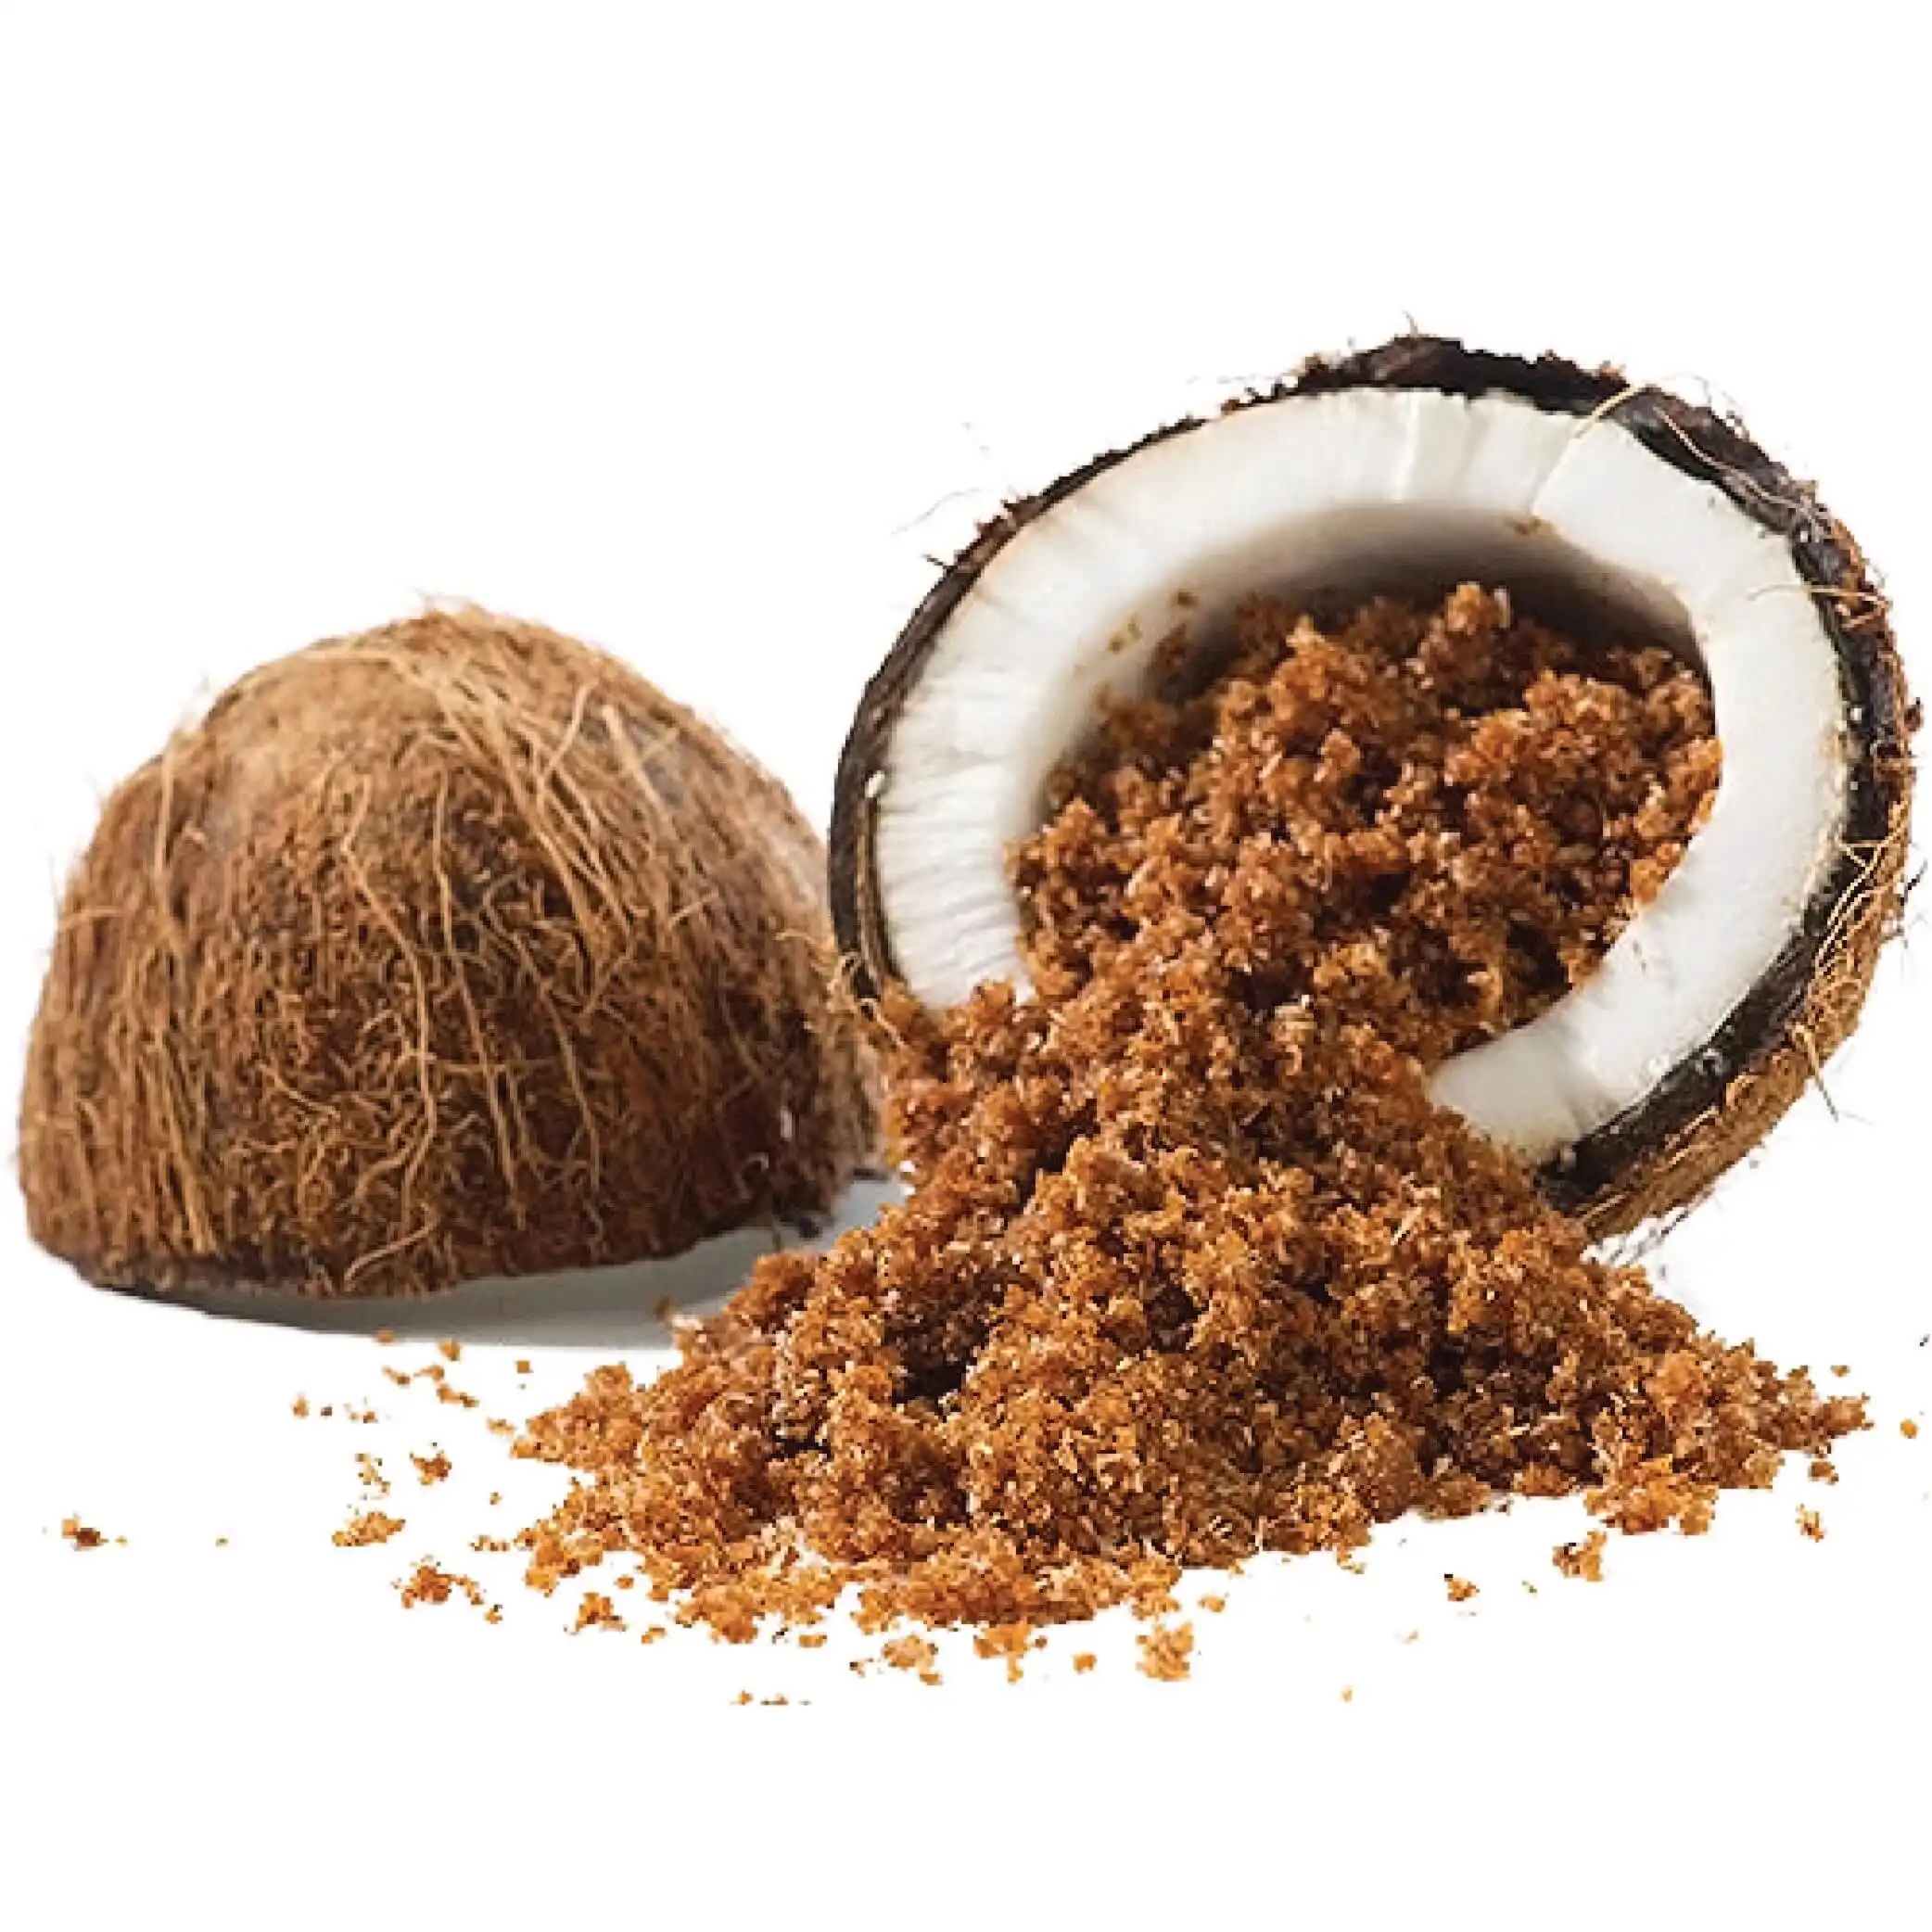 Whole seller of Coconut Sugar Top sale of Coconut Sugar Vietnam Distributor of Coconut Sugar